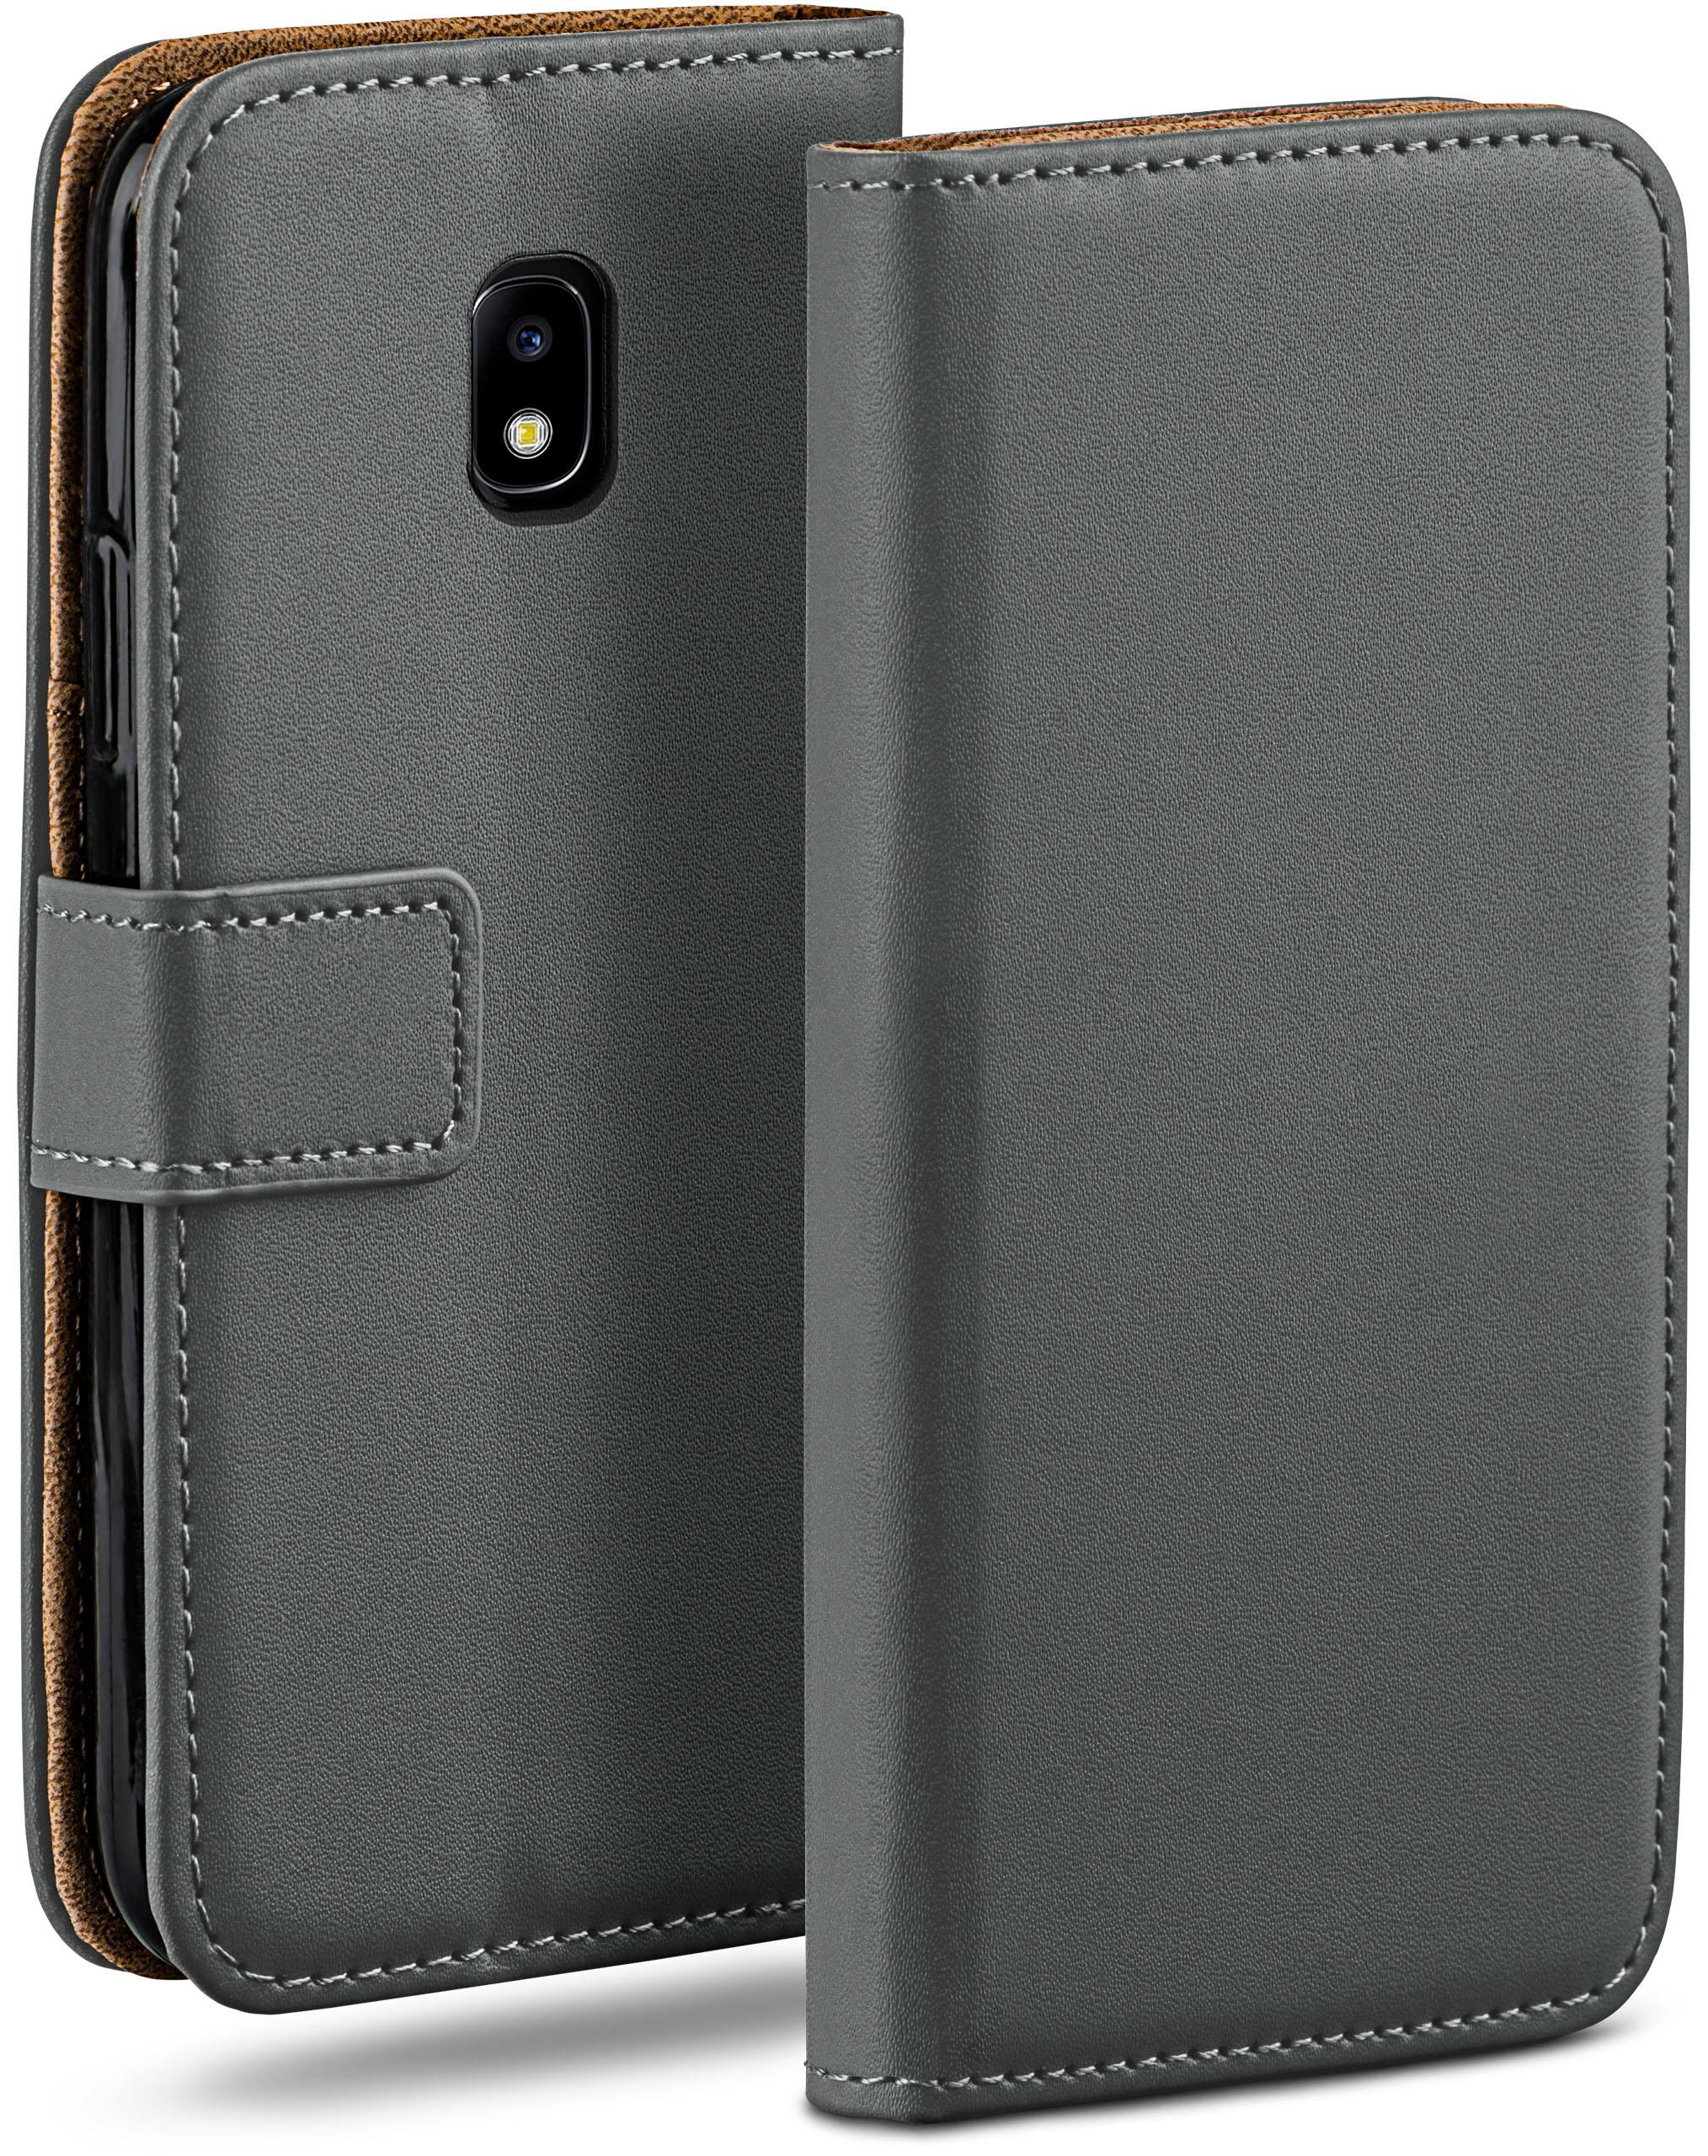 Case, Galaxy J5 (2017), Book Samsung, Bookcover, Anthracite-Gray MOEX